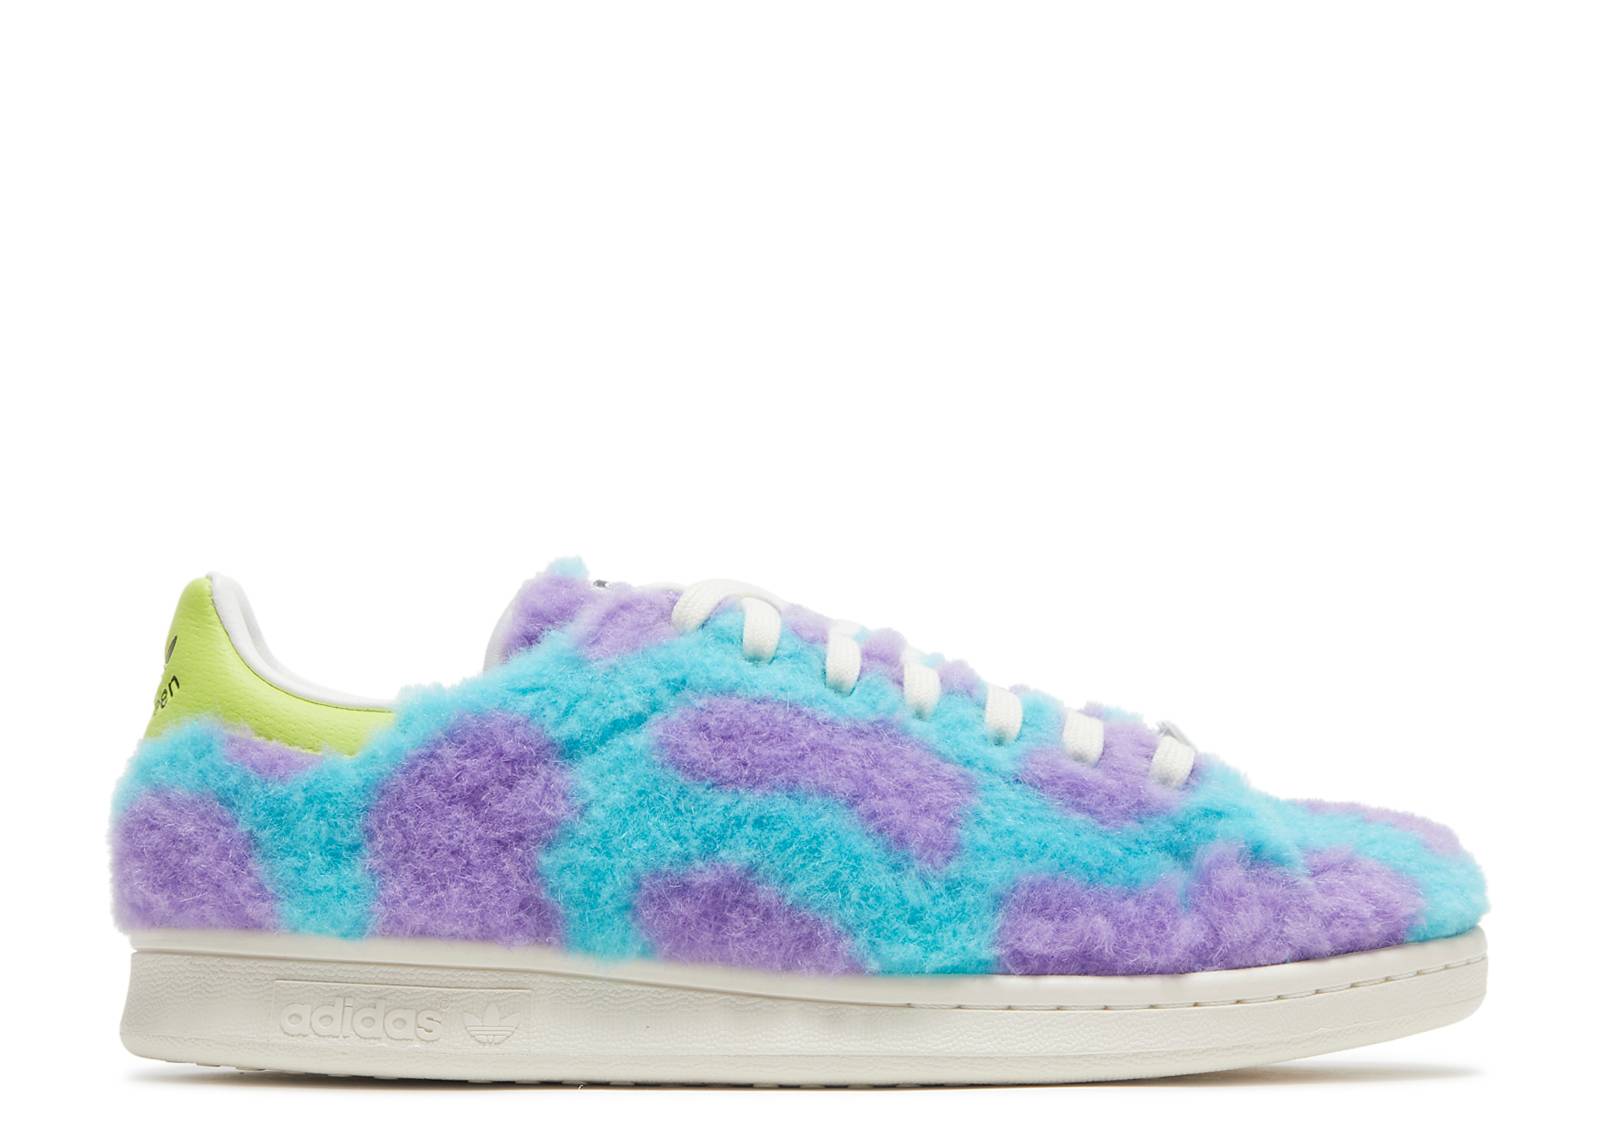 Monsters Inc. x Stan Smith 'Mike & Sulley'